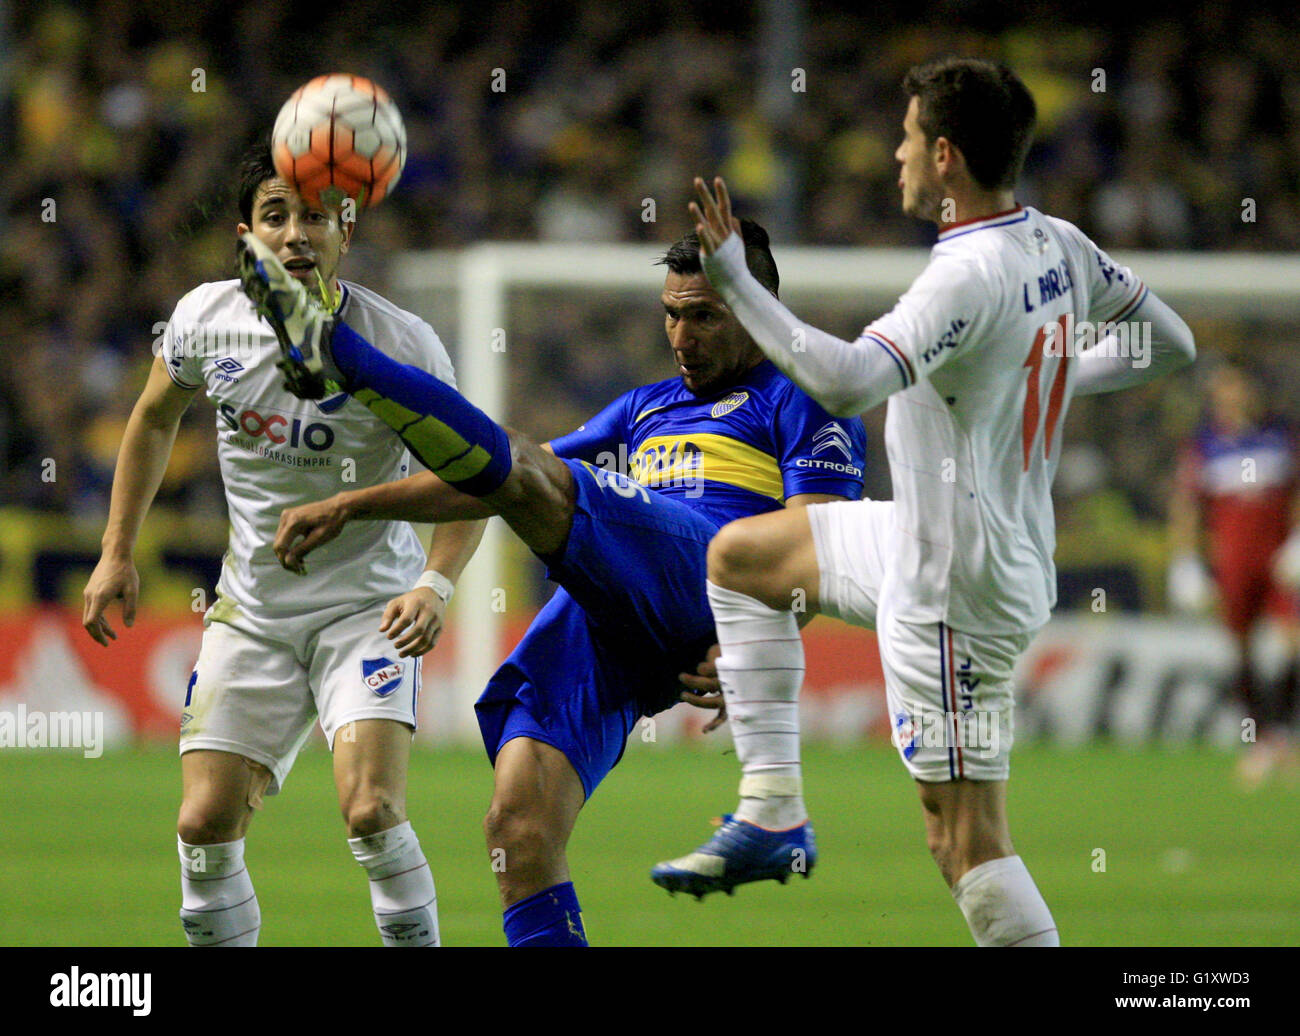 Buenos Aires, Argentina. 19th May, 2016. Andres Chavez (C) of Argentina's Boca Juniors vies with Jorge Fucile (L) and Leandro Barcia of Uruguay's Nacional during their second leg match of the quarterfinals of the Libertadores Cup in Buenos Aires, Argentina, on May 19, 2016. © Martin Zabala/Xinhua/Alamy Live News Stock Photo